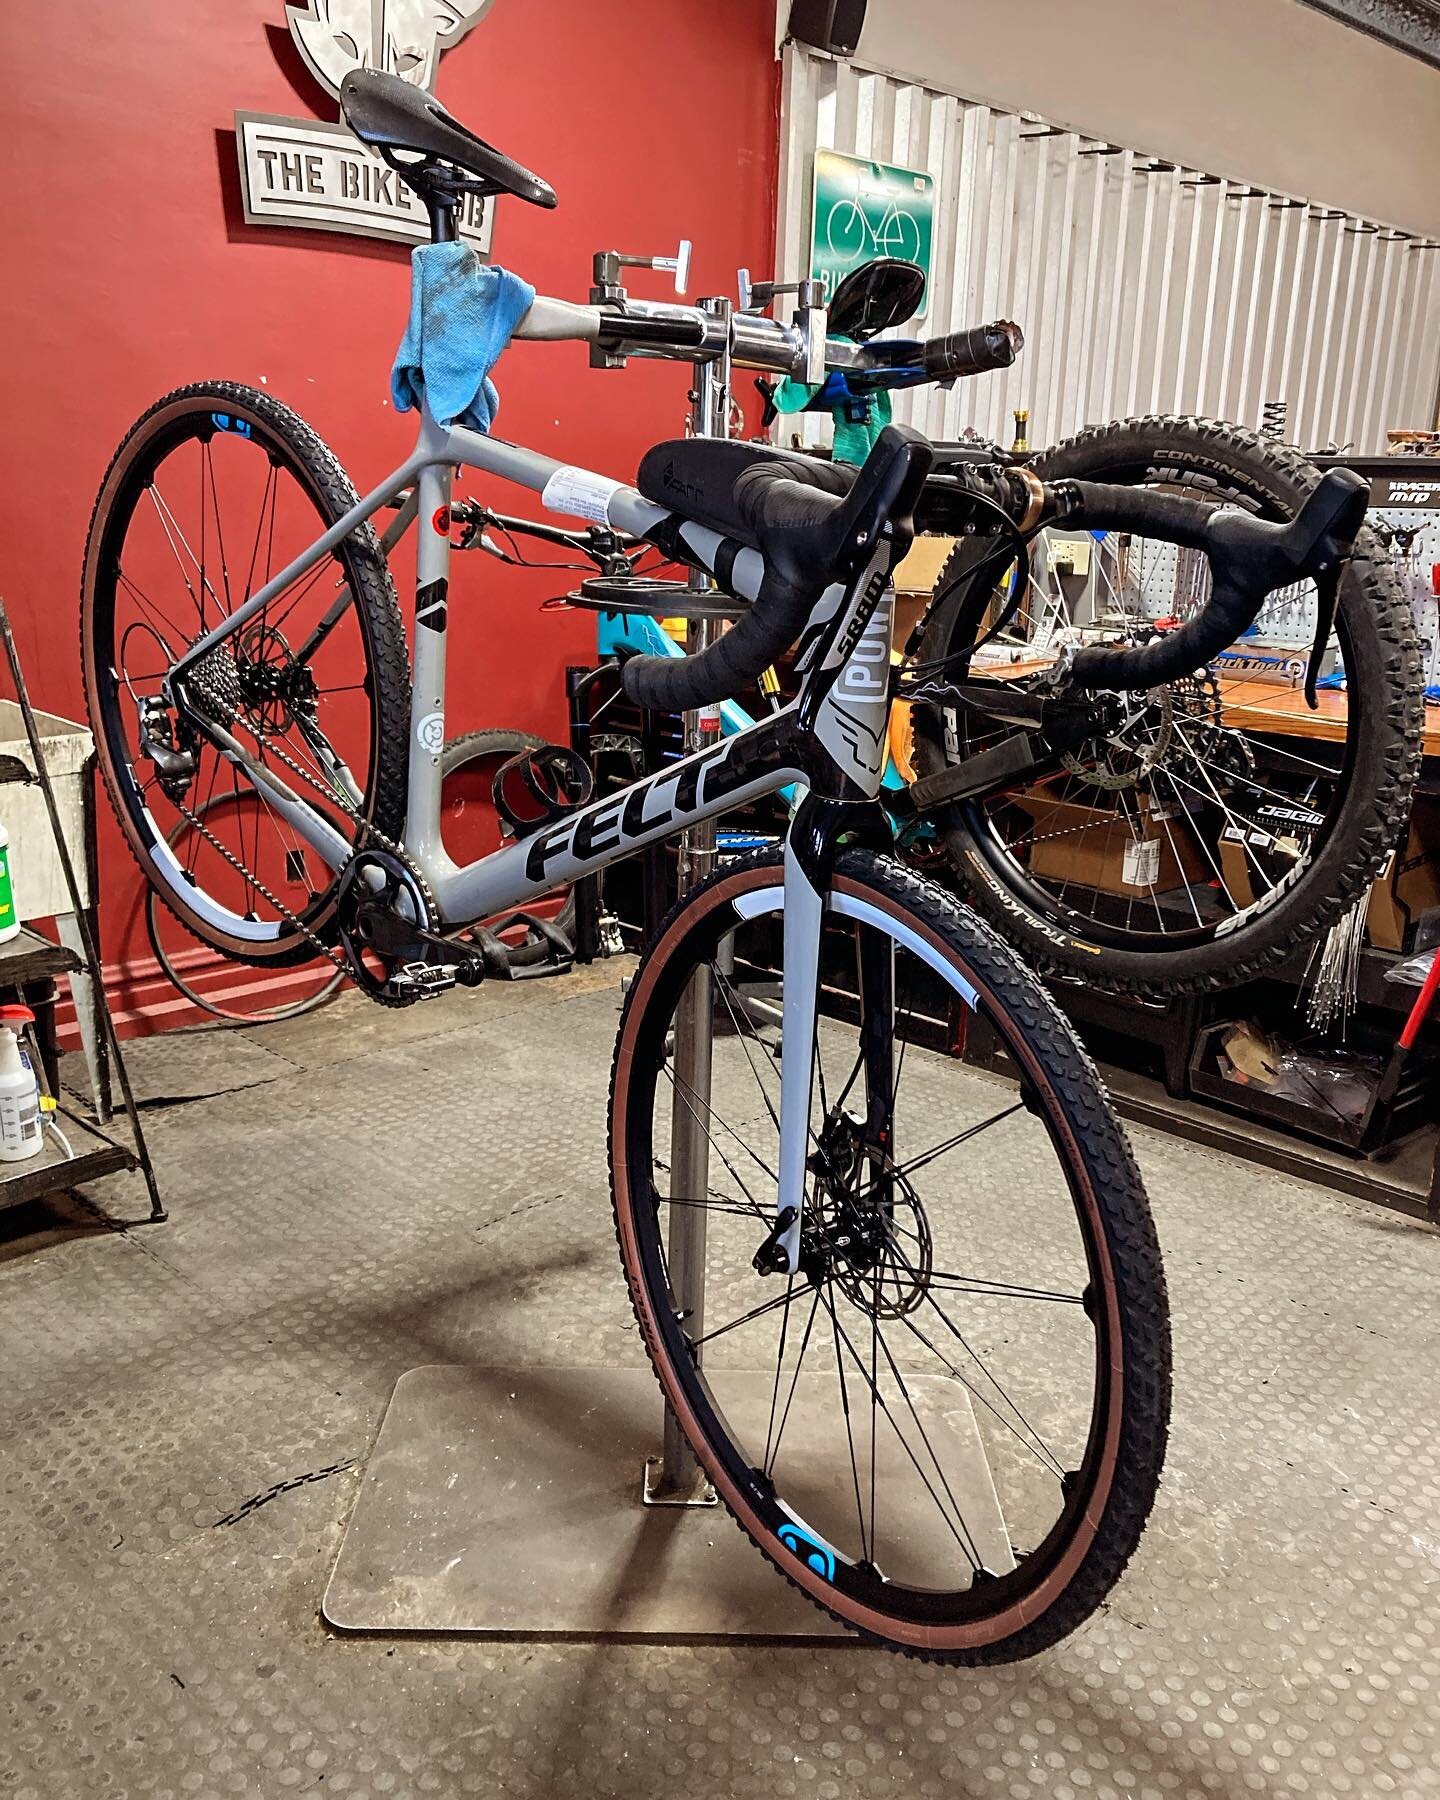 Tune ups are rolling in! Take advantage of the slow period with faster turn arounds. Especially if we&rsquo;re doing overhauls! #tuneuptime #springseason #aroundthecorner #cyclingseason #bikemaintenance #tuning #artists #newtires #fresh #barwrap #gra